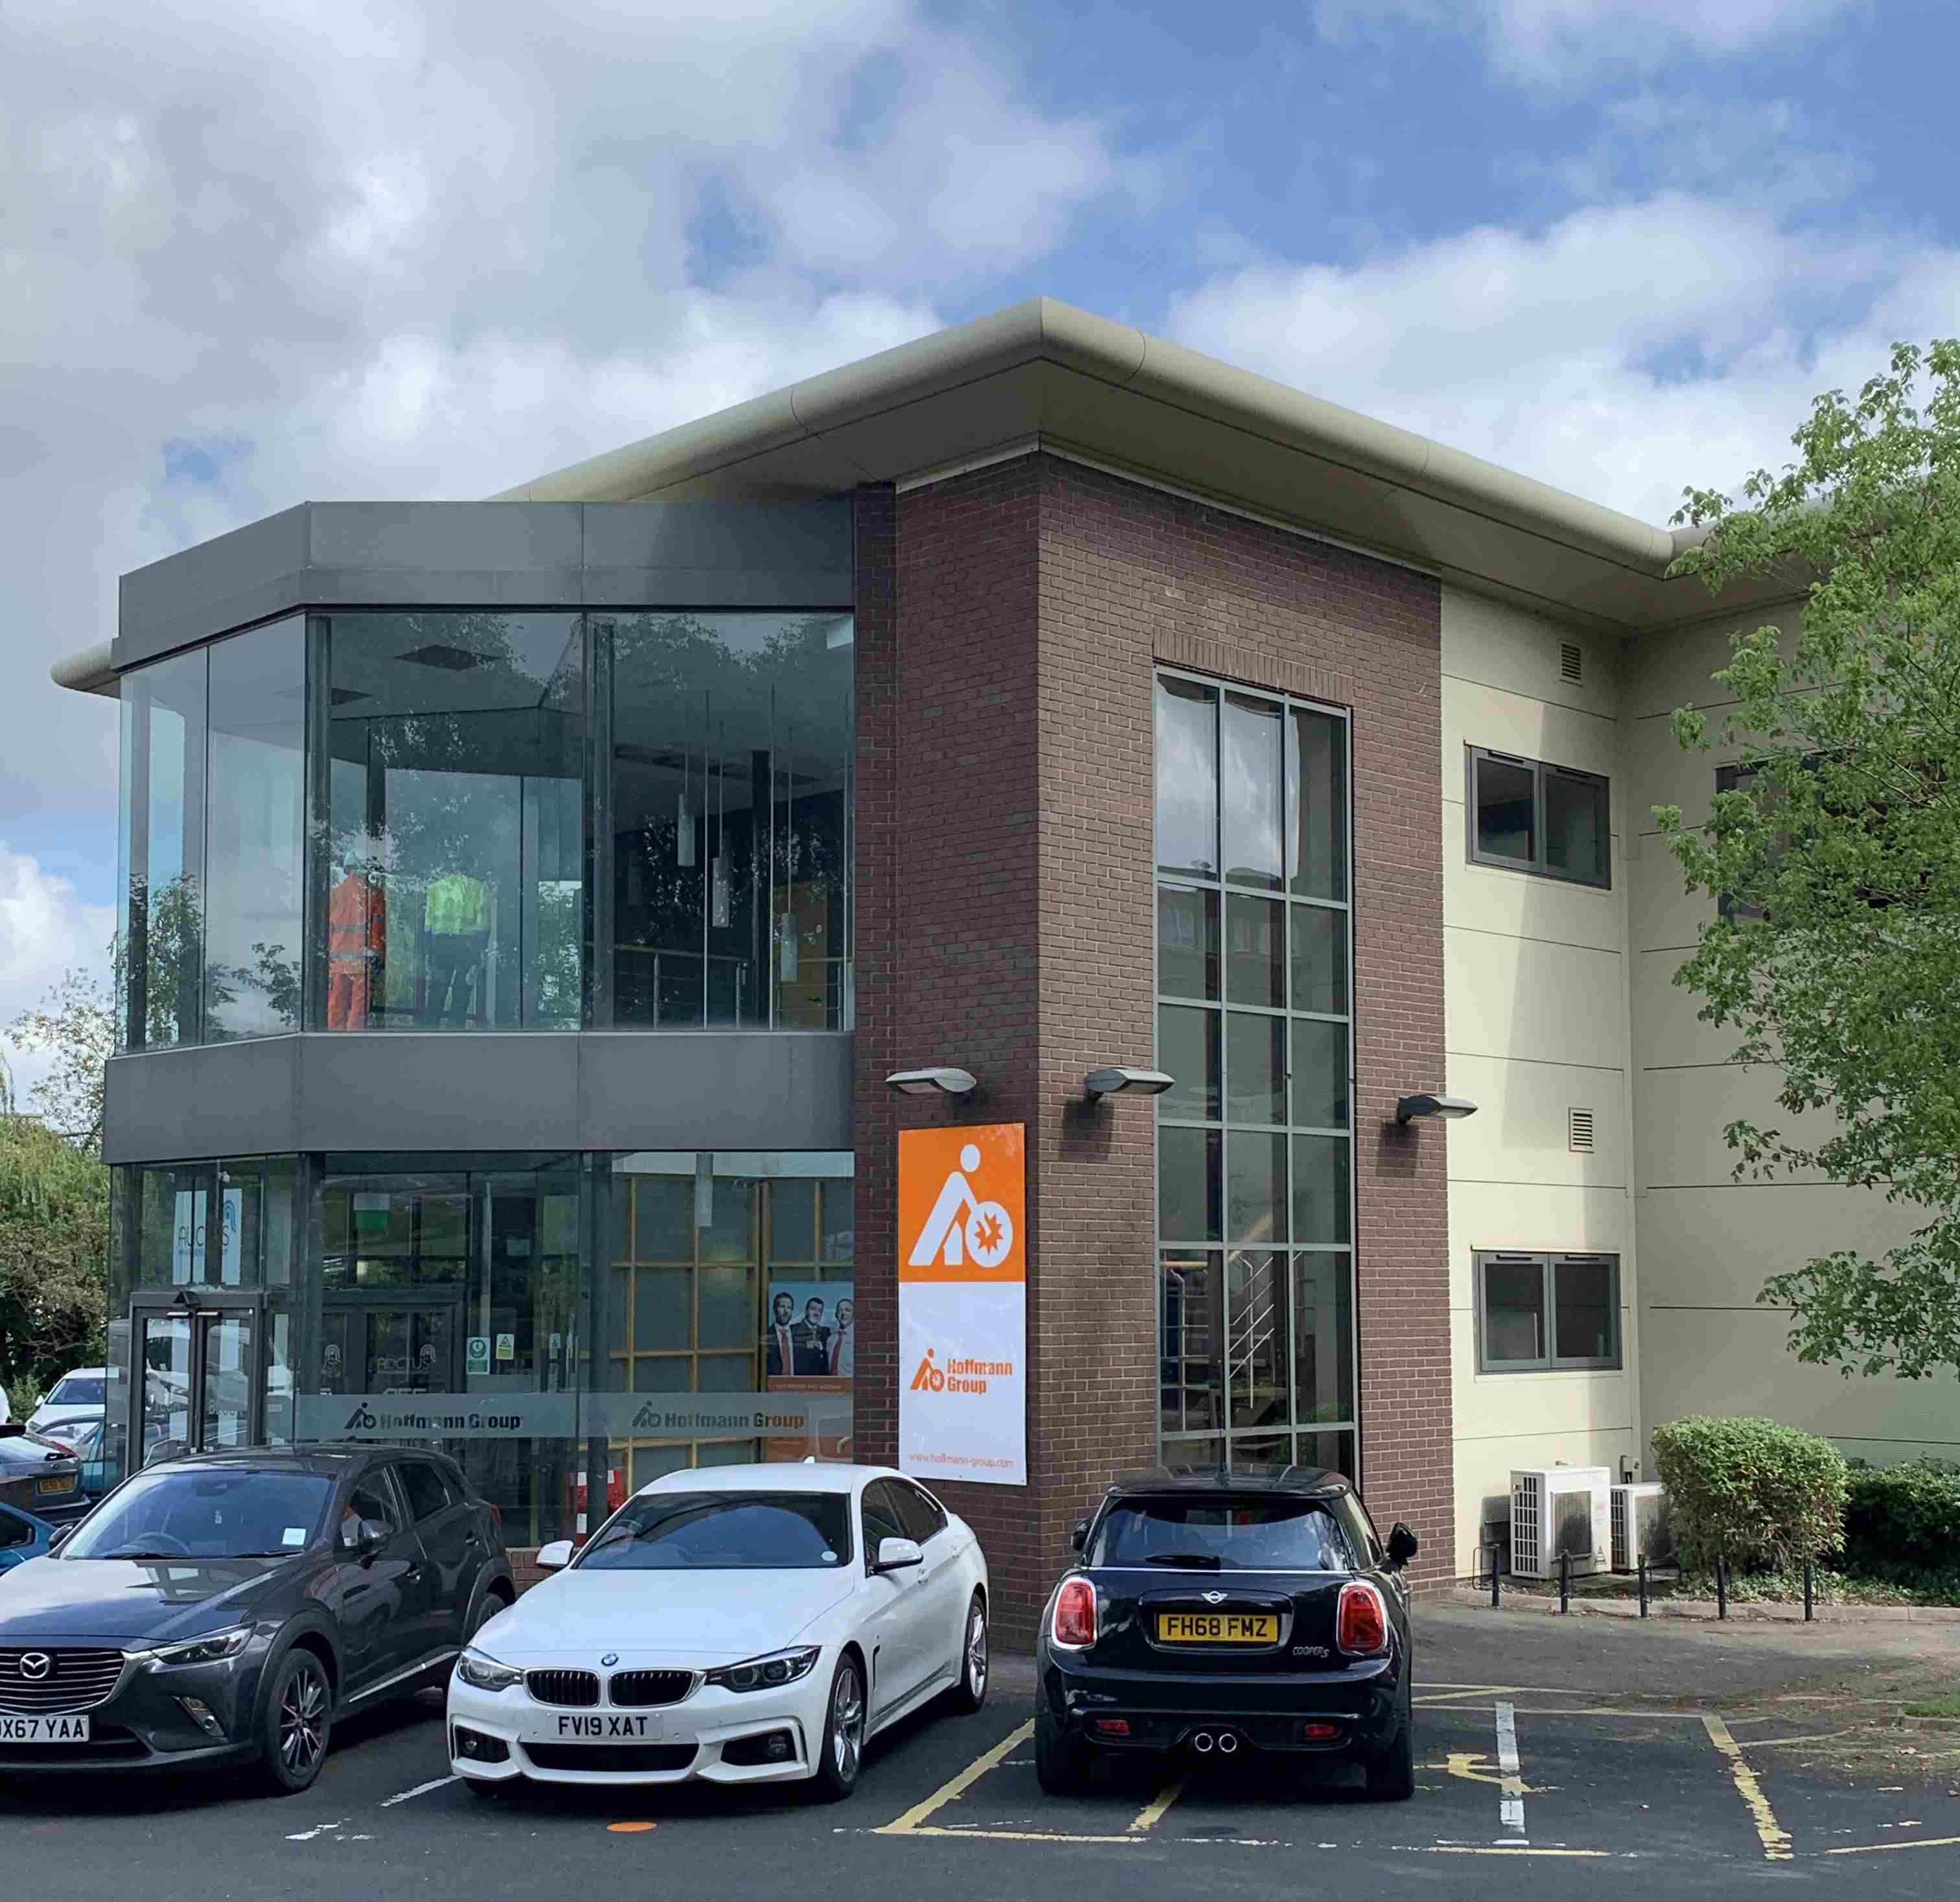 Hoffmann Group UK recently extended its logistics area by opening a new warehouse in Aston, Birmingham